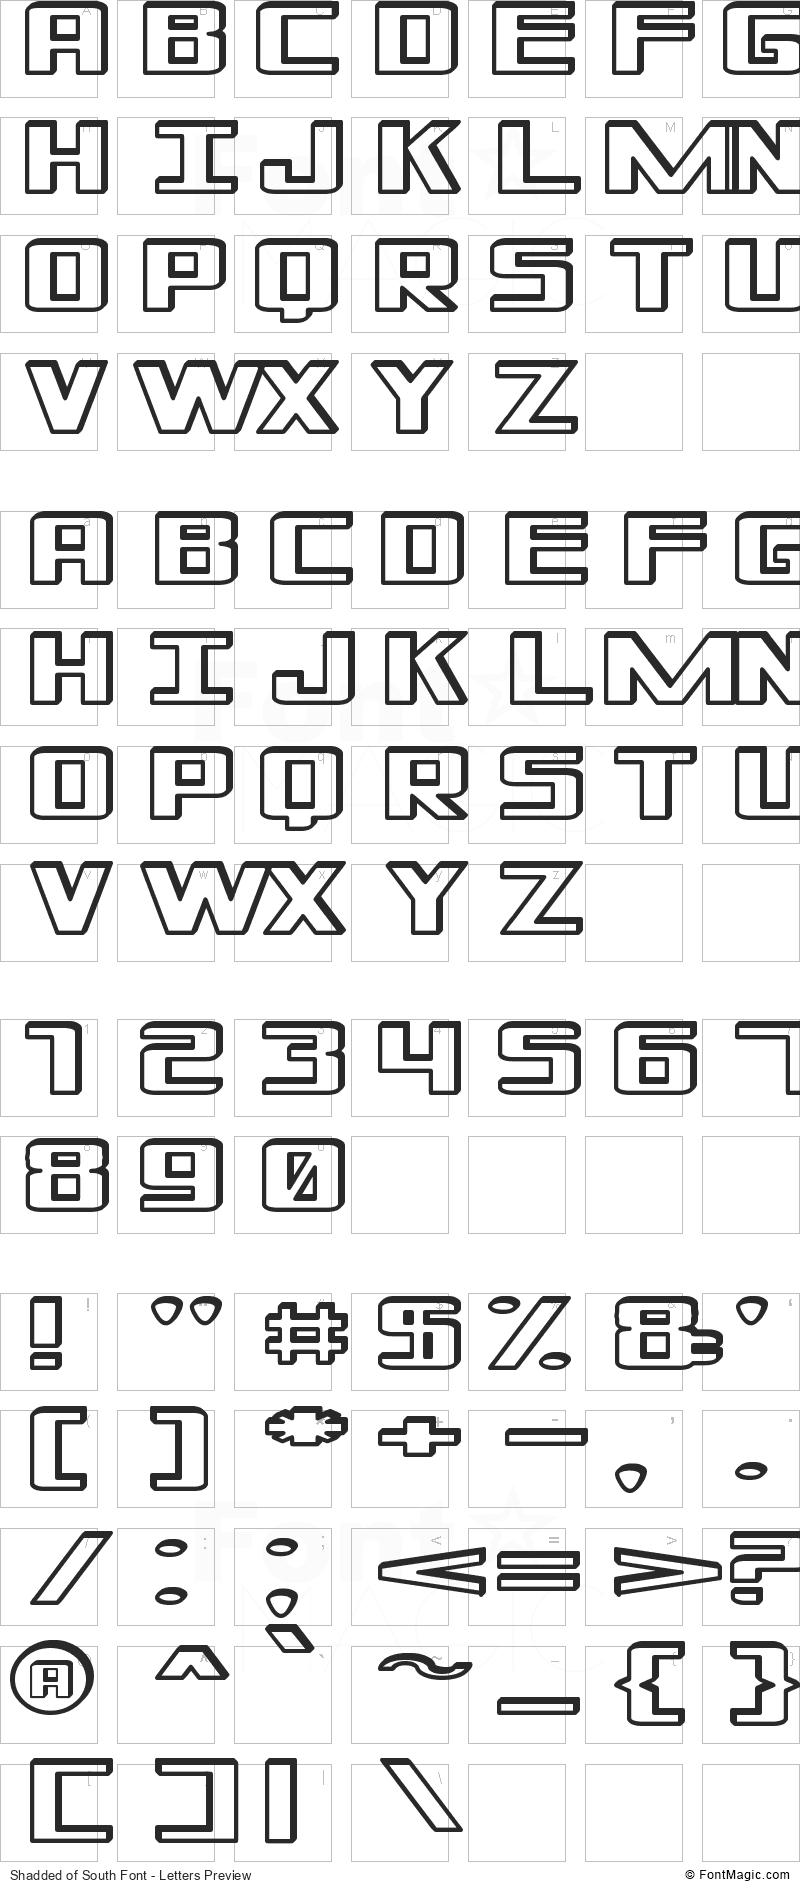 Shadded of South Font - All Latters Preview Chart